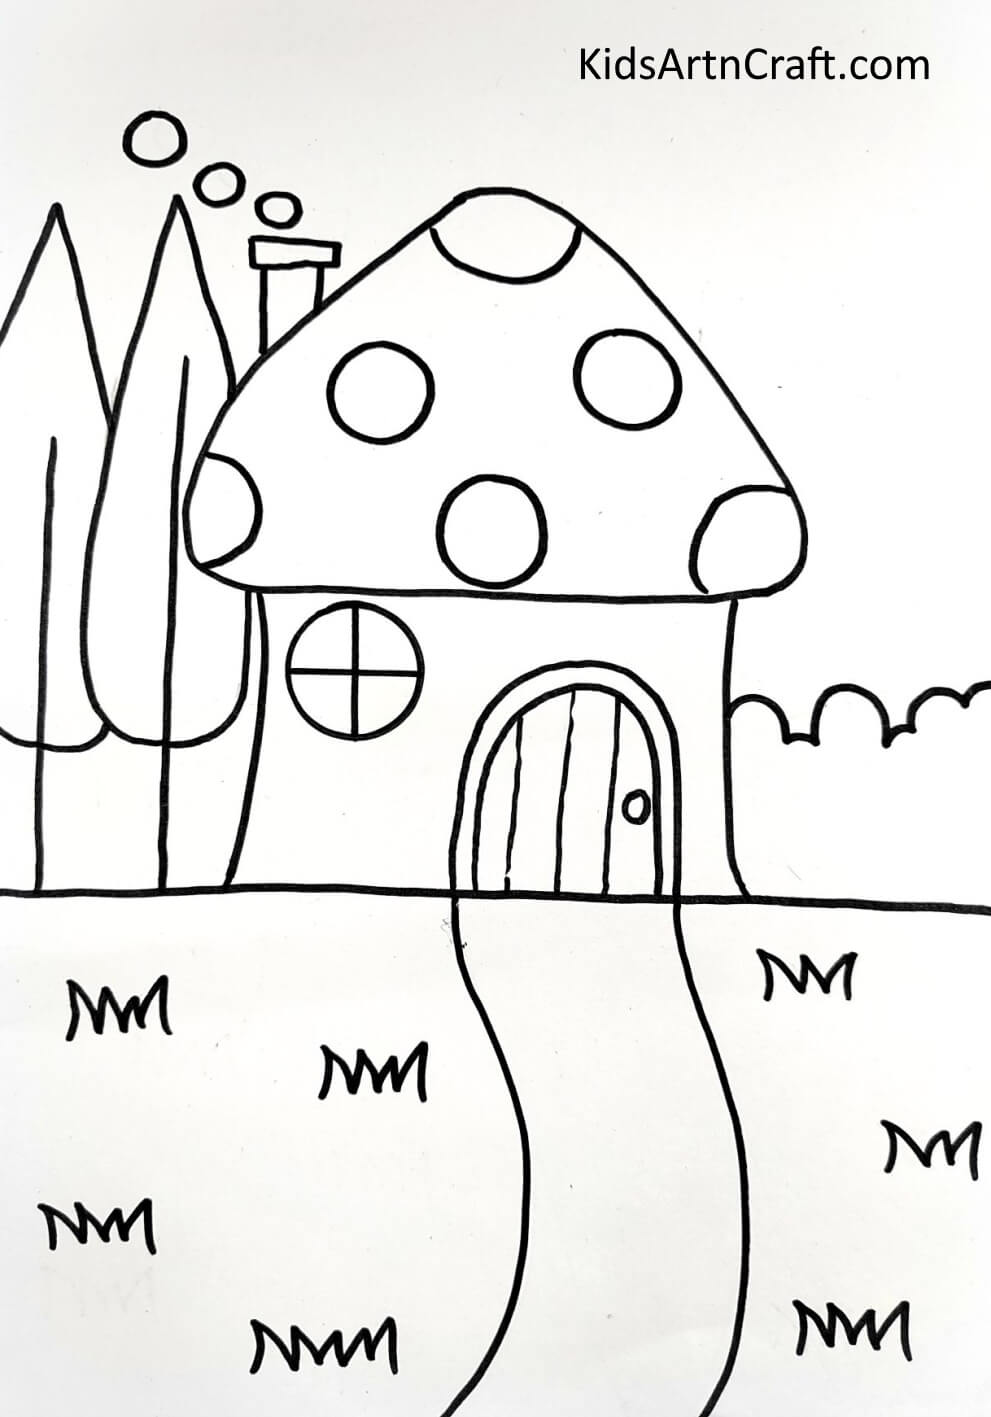 Drawing The Garden - A Step-by-Step Guide on Creating a Mushroom House